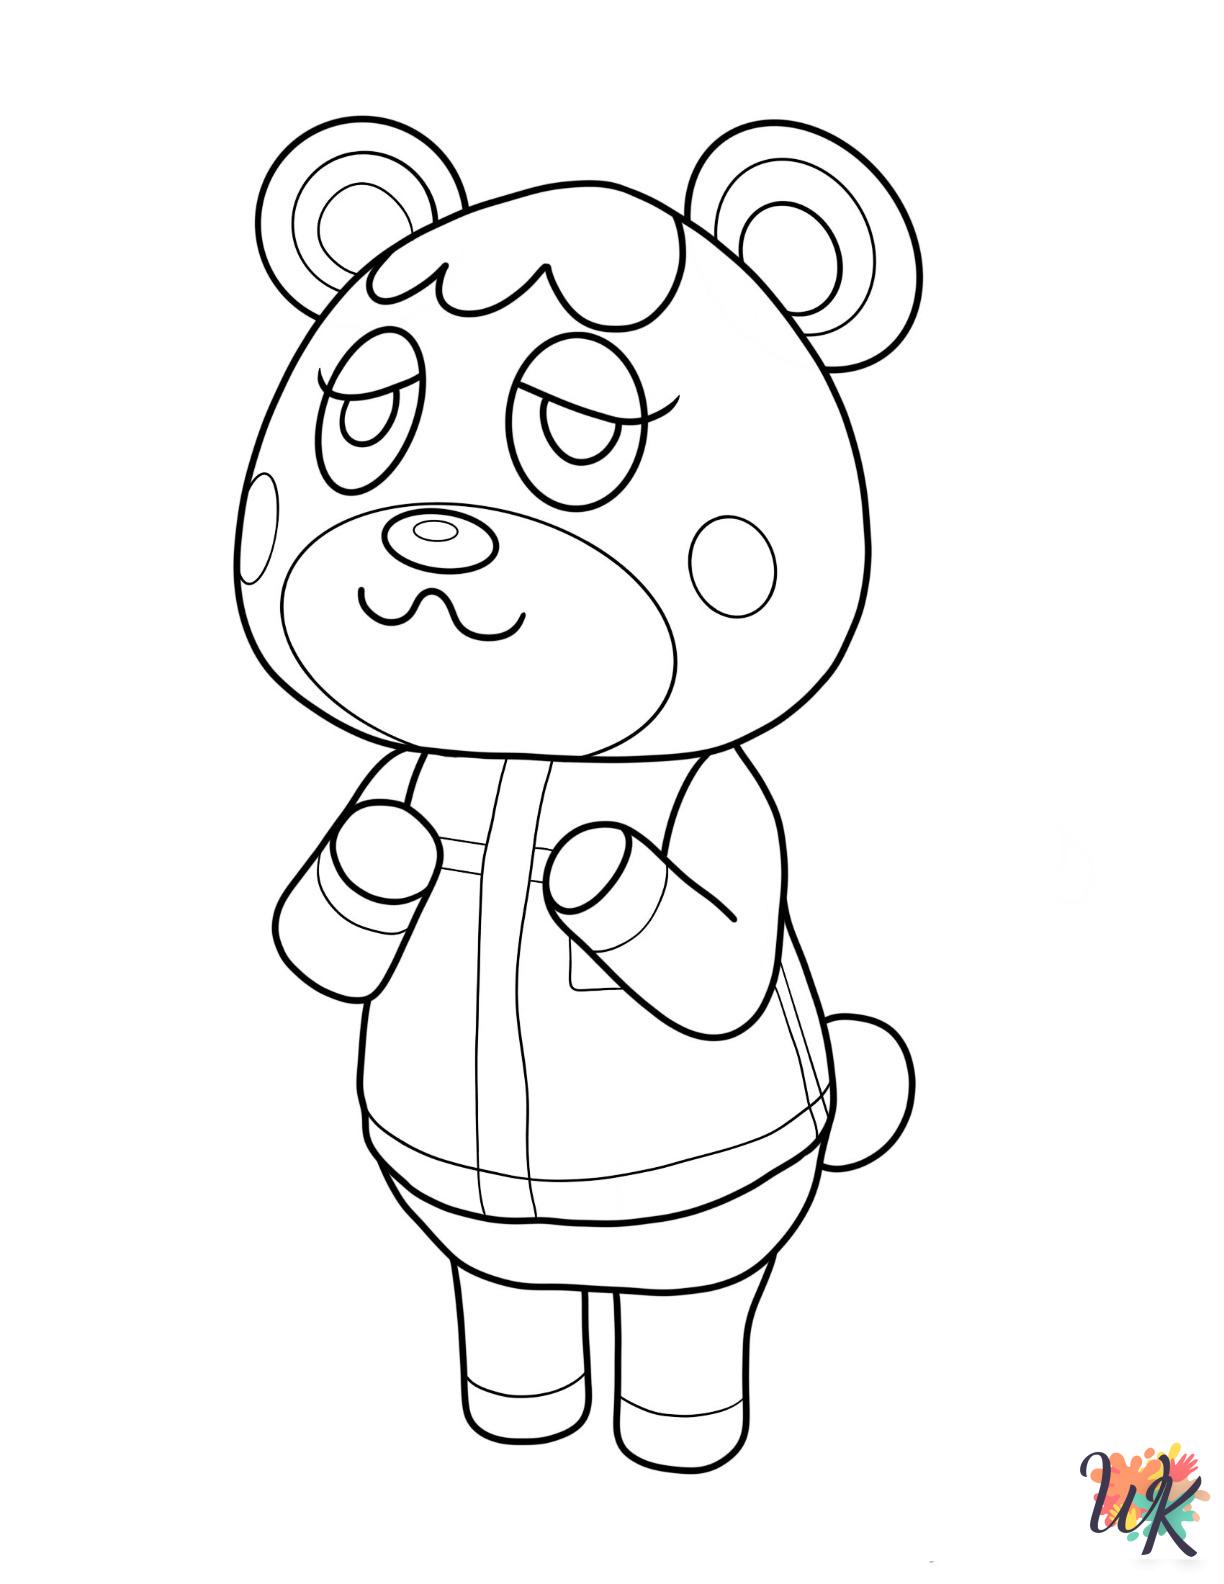 Animal Crossing coloring pages